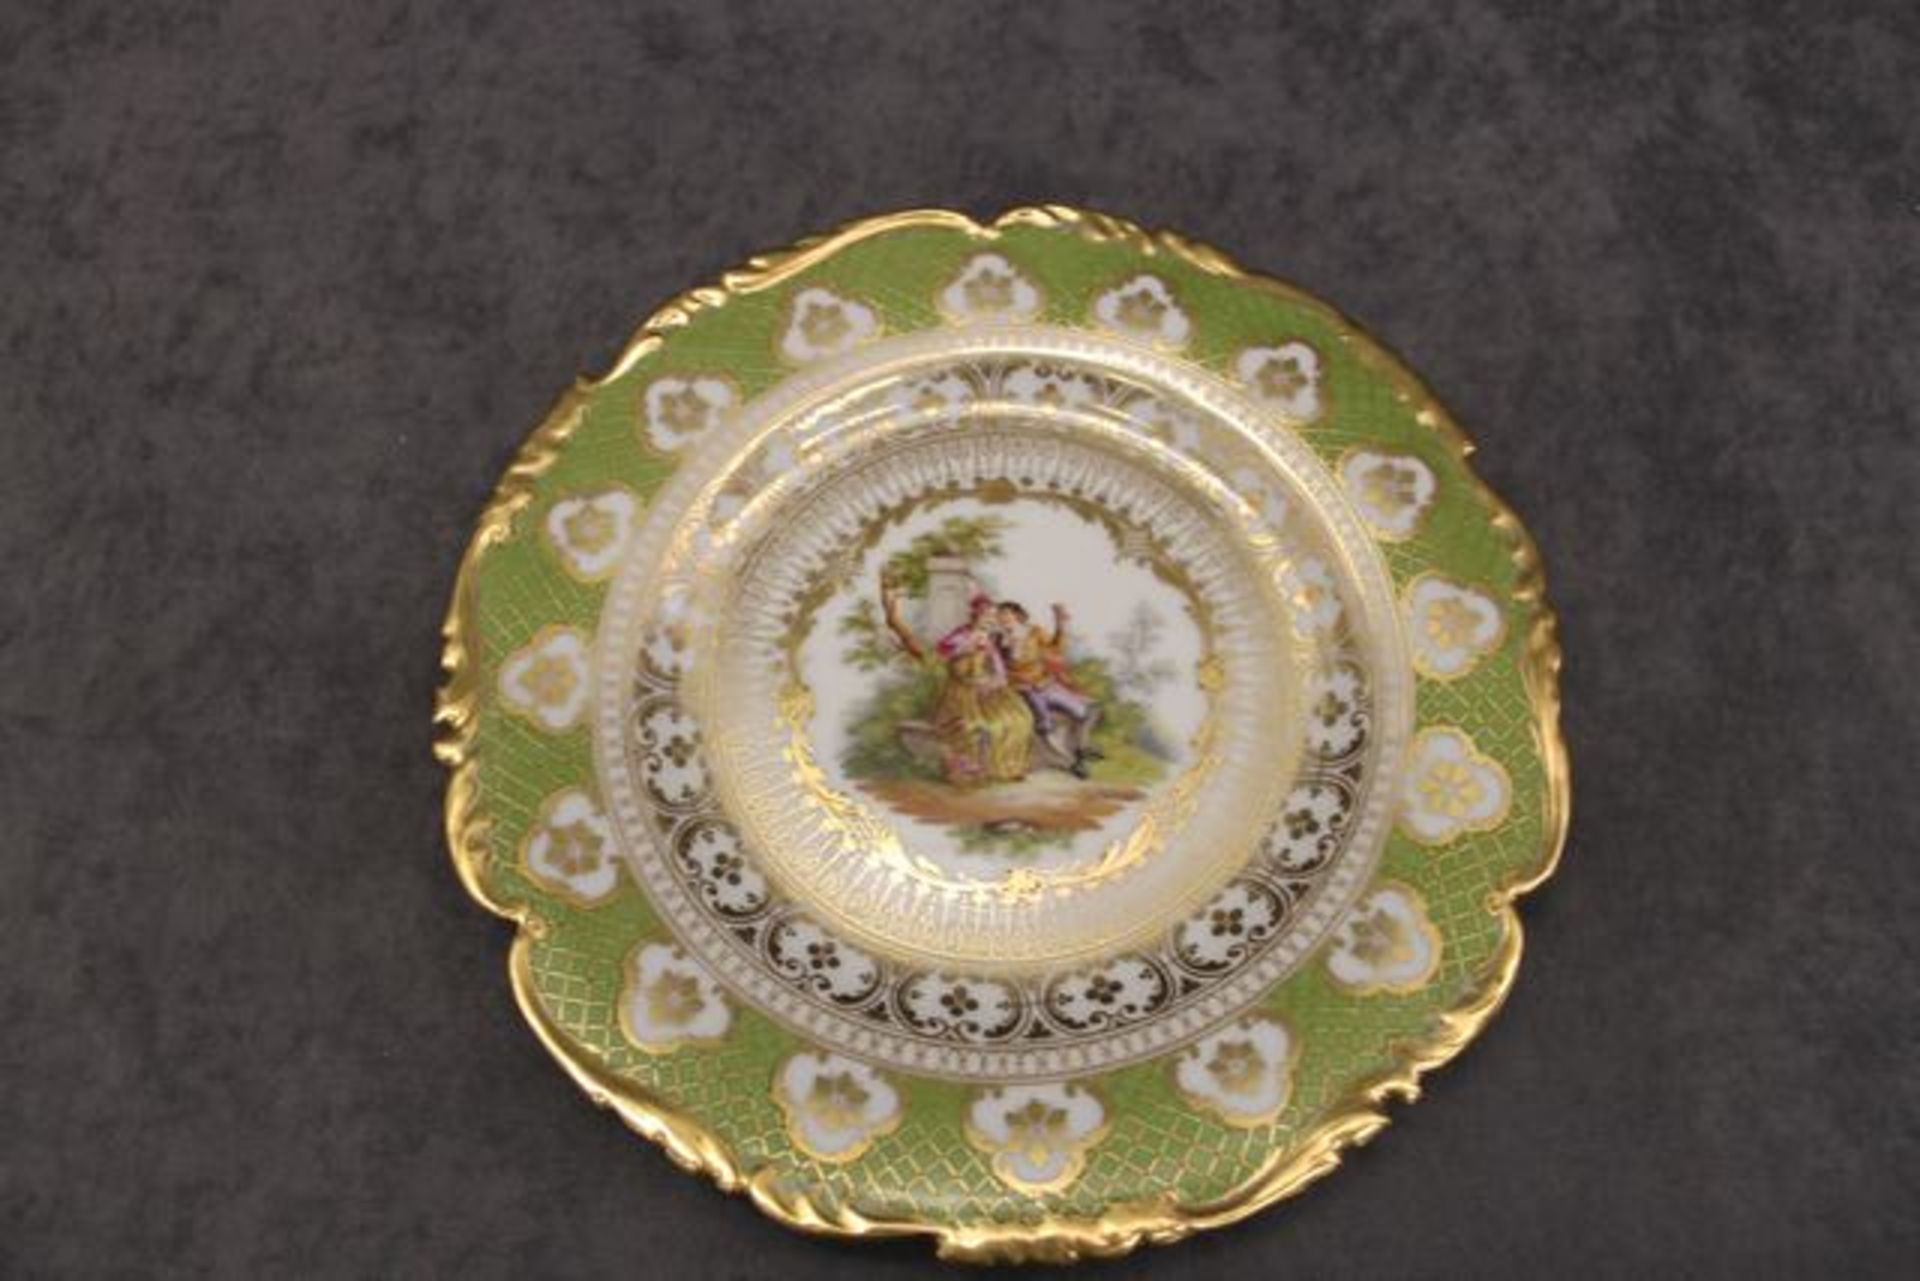 Karl Richard Klemm hand painted porcelain plate, hand painted with gilding decorations depicting a